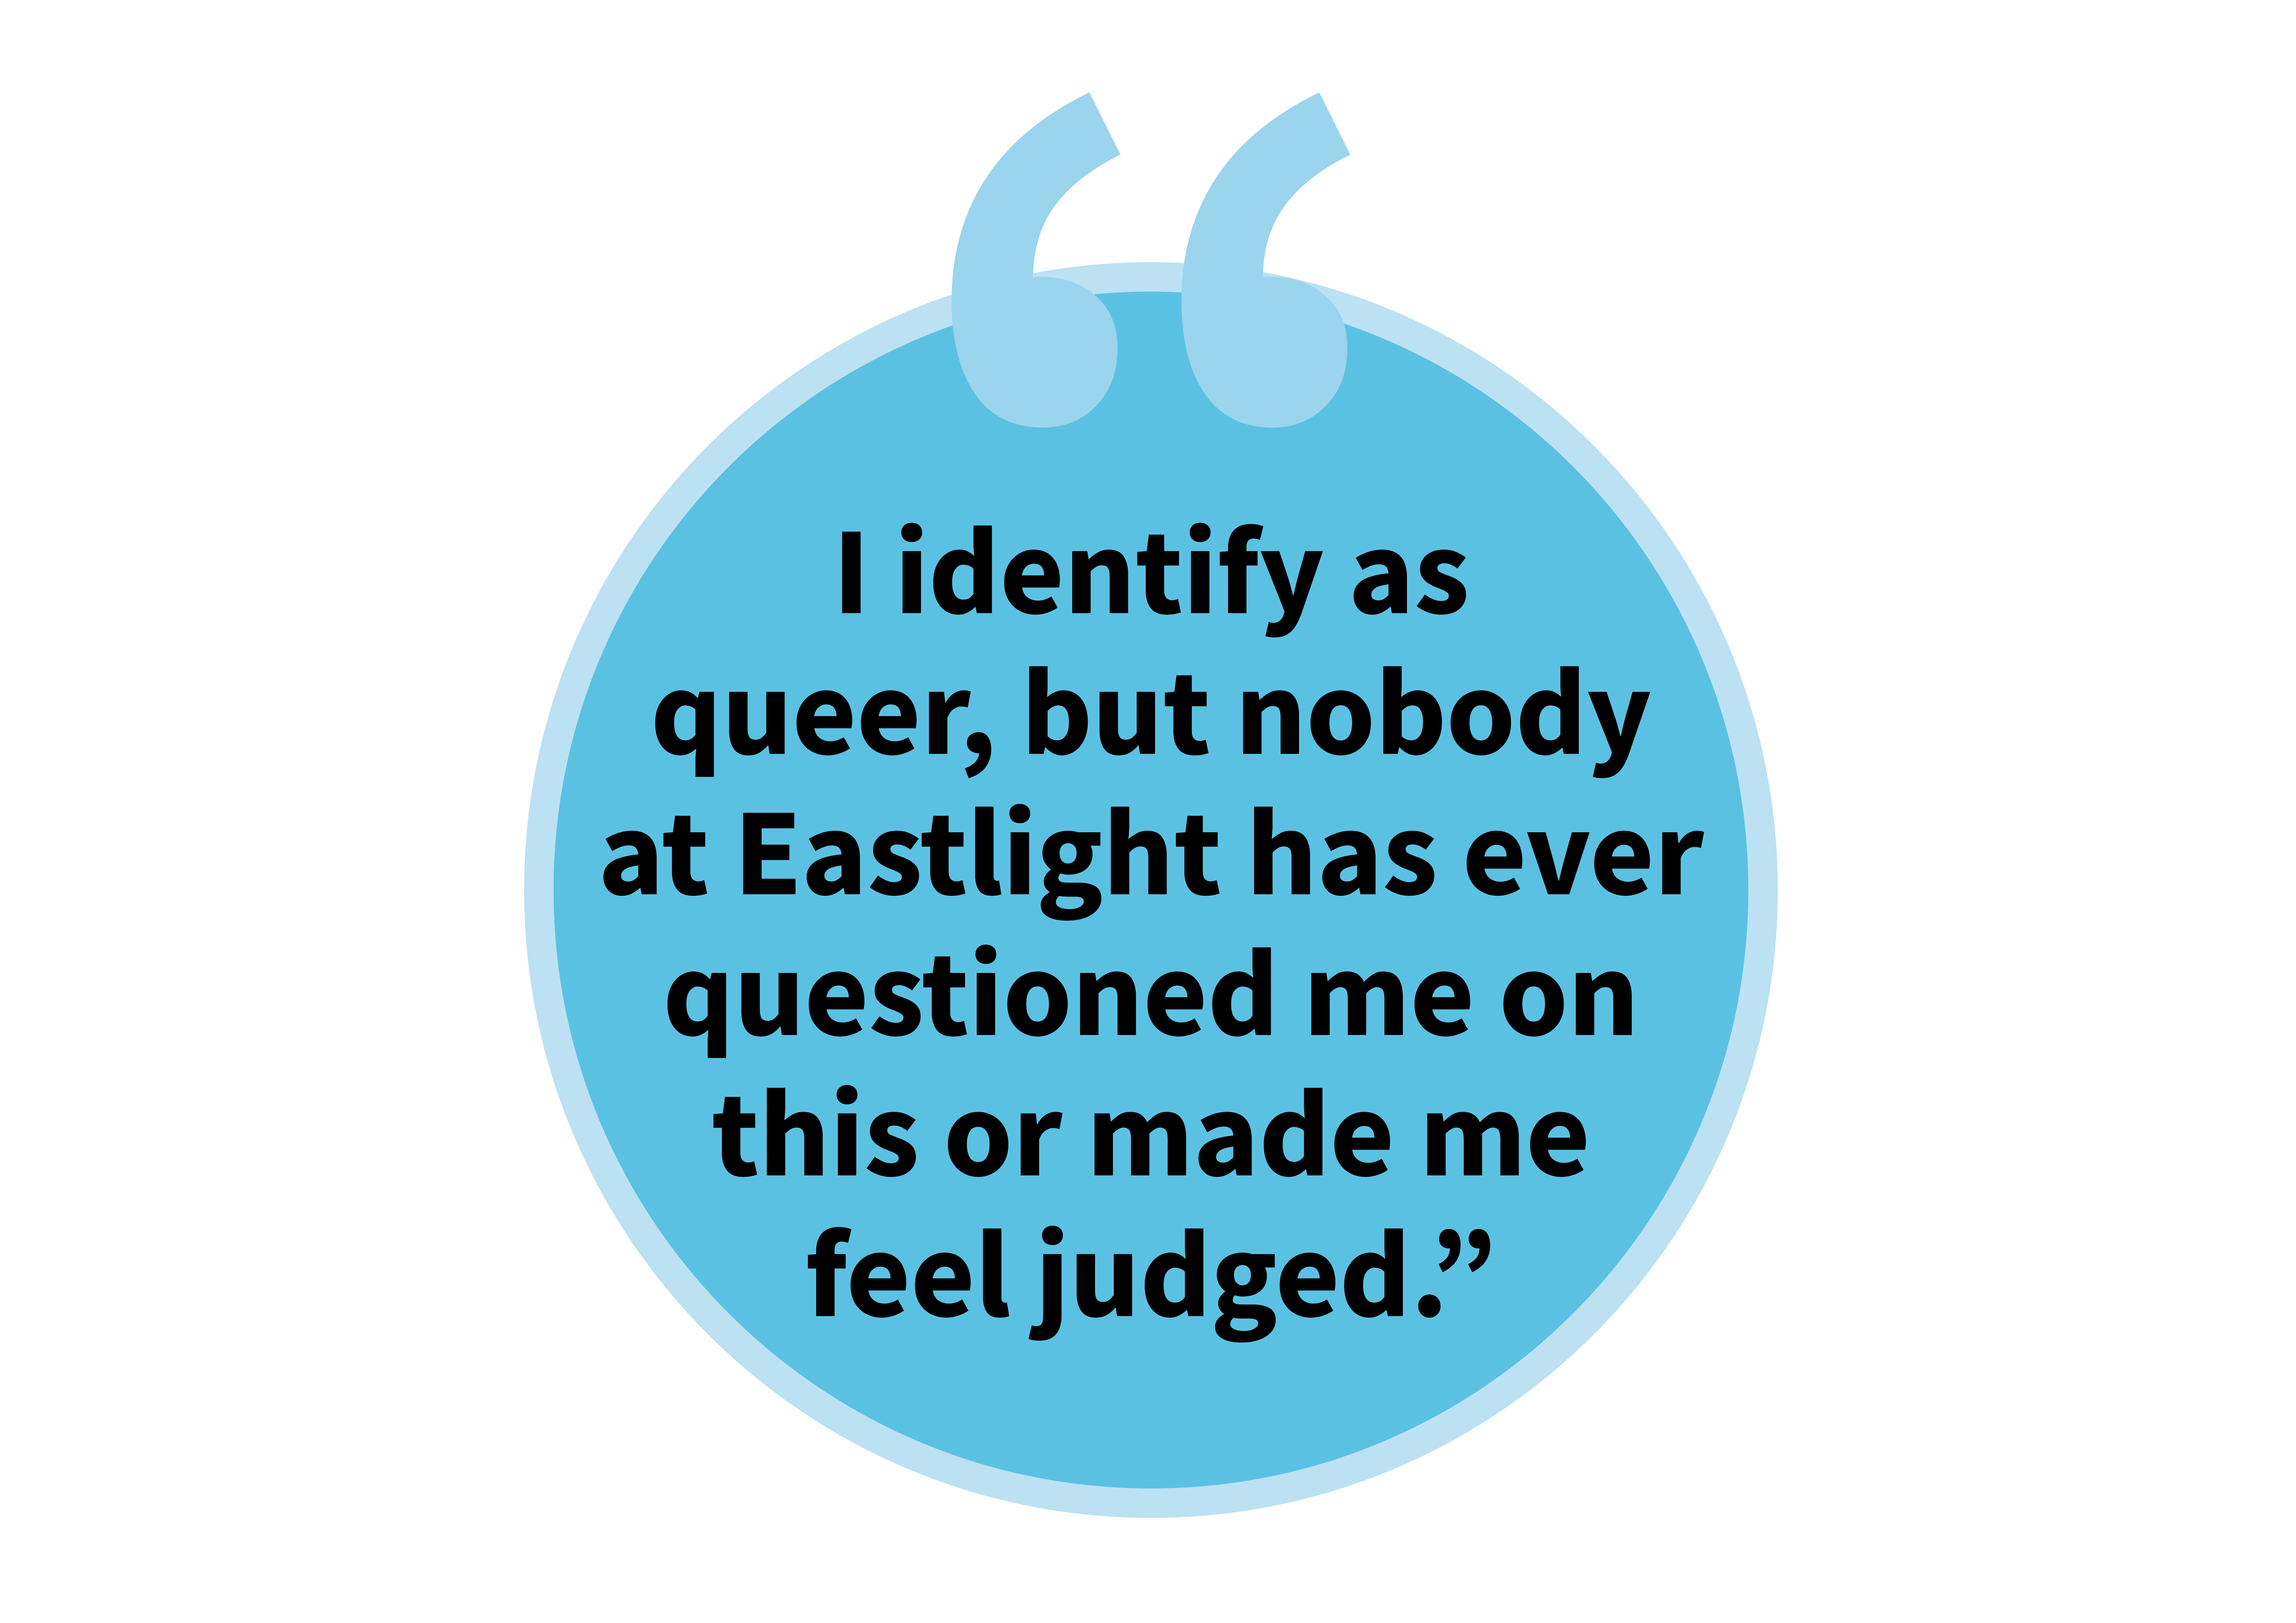 Quote saying "I identify as queer, but nobody at Eastlight has ever questioned me on this or made me feel judged."